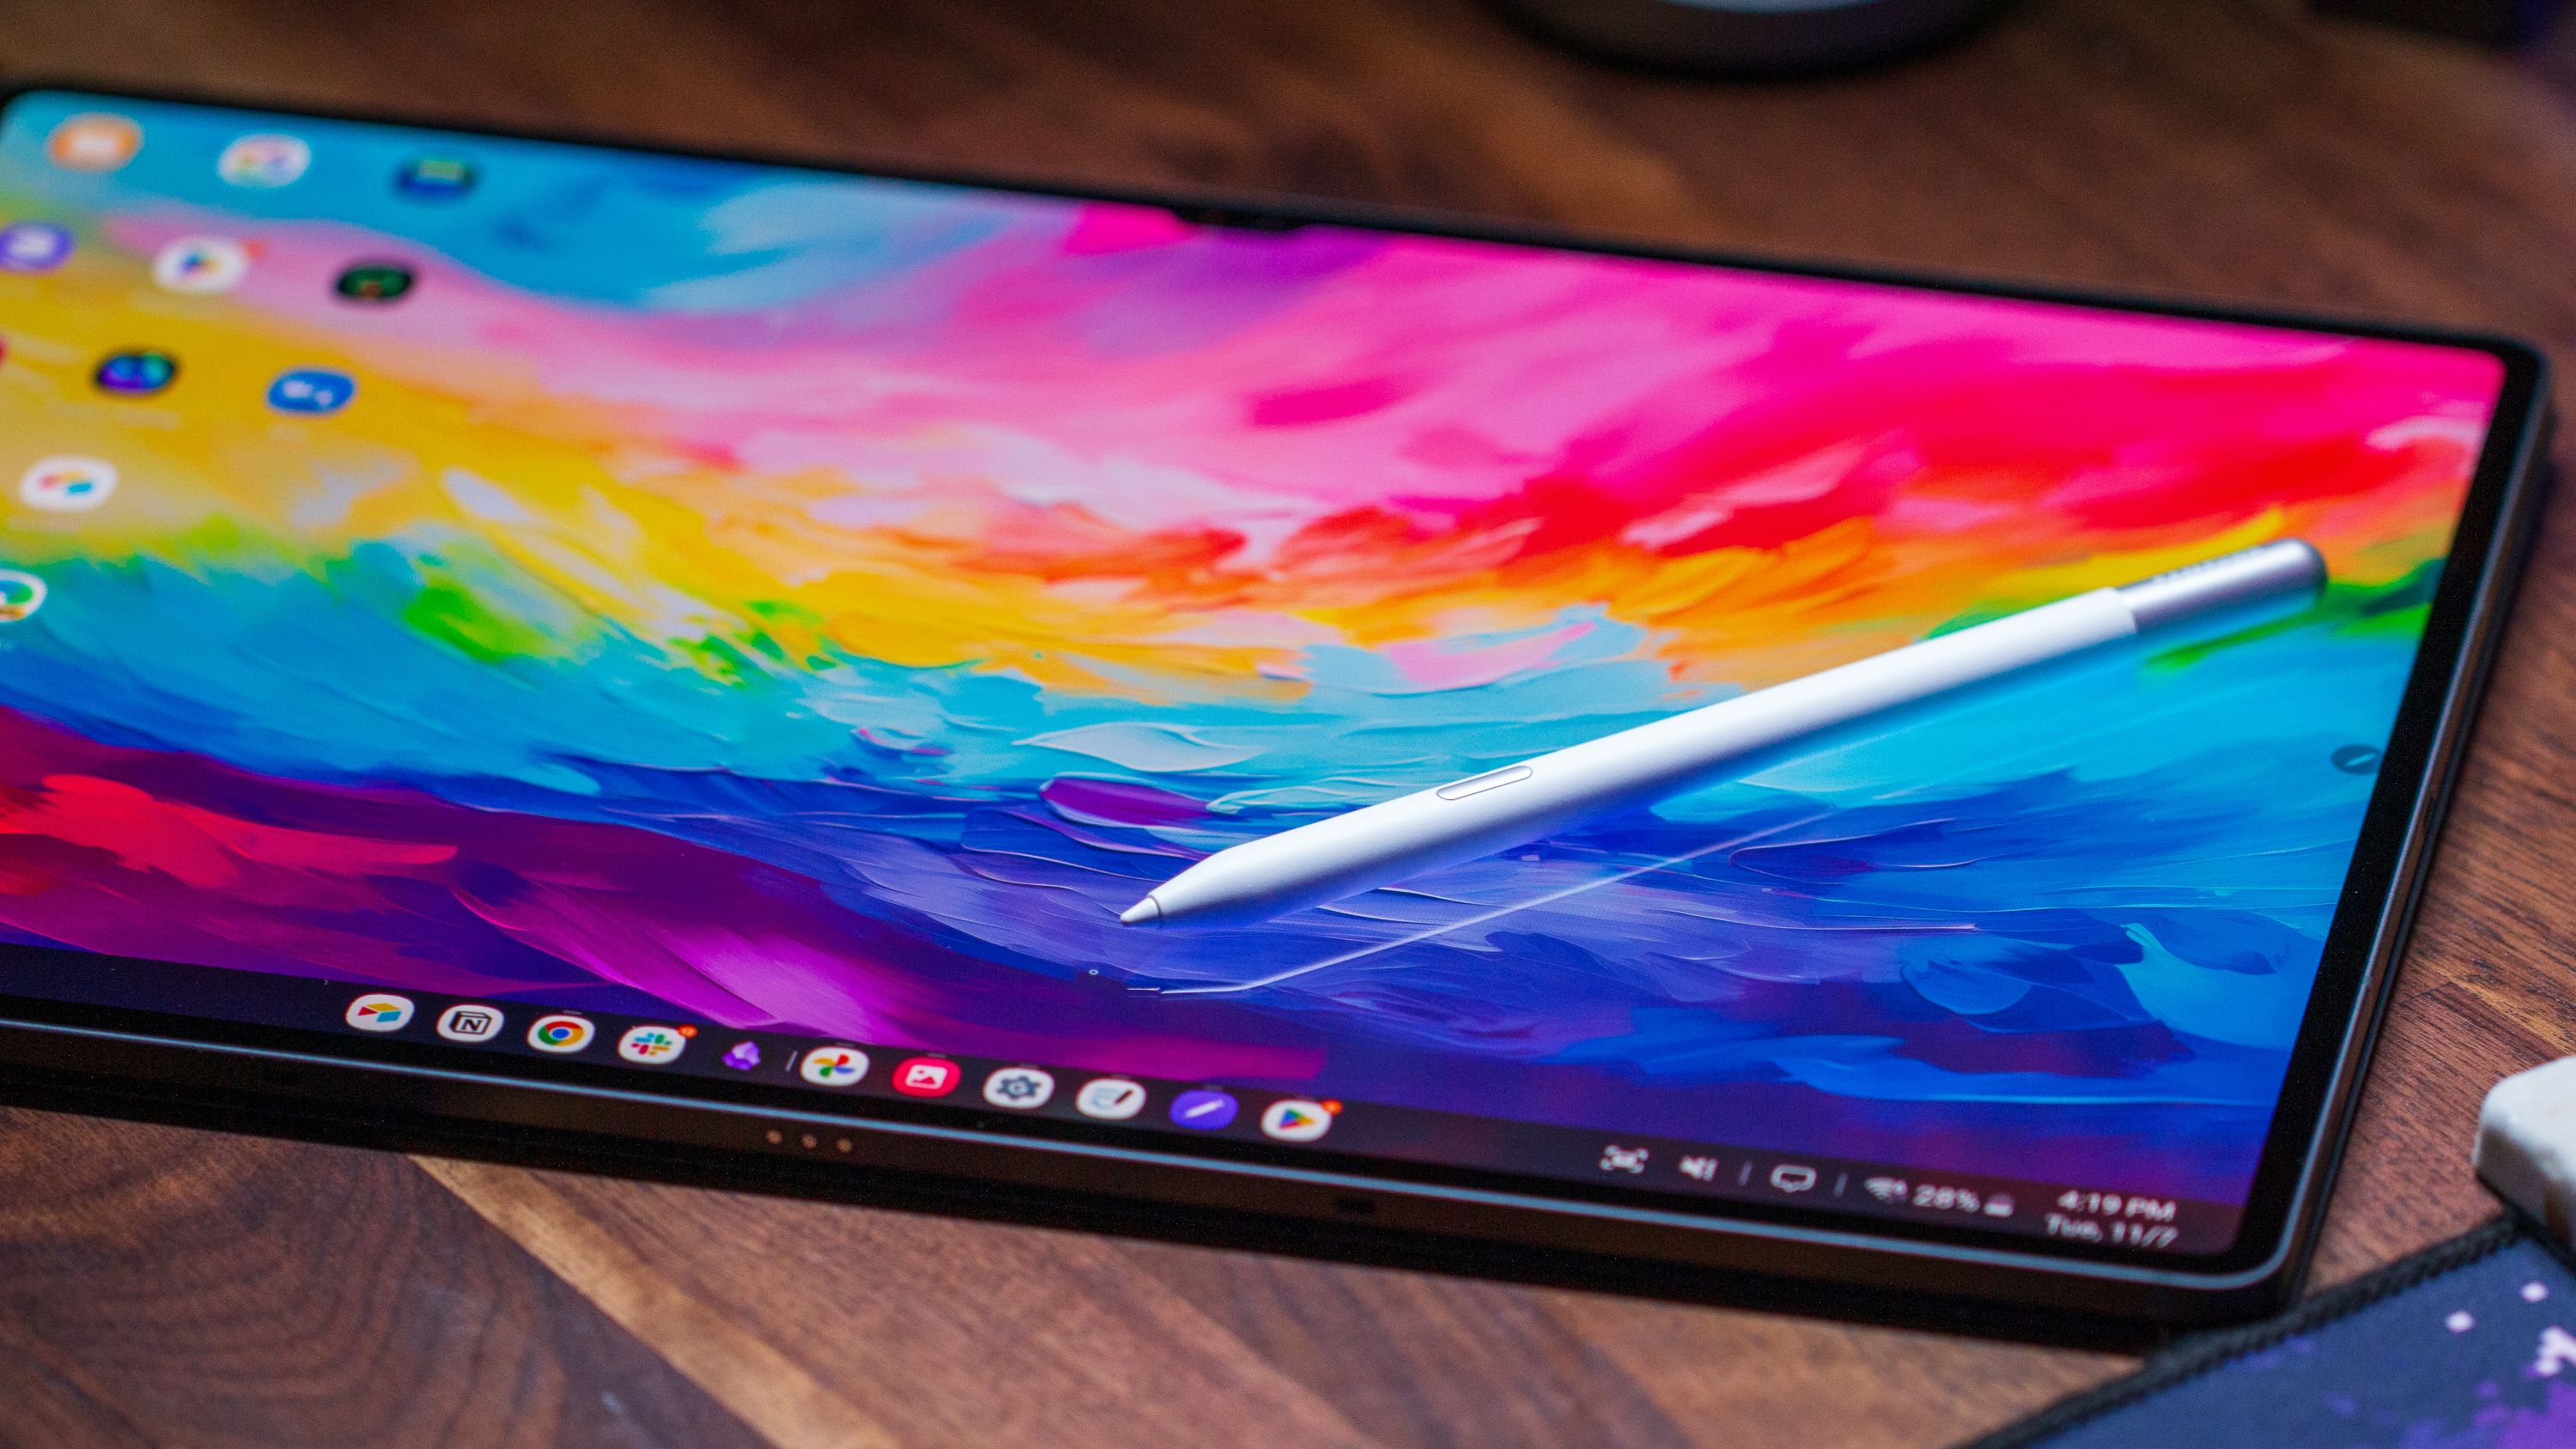 Samsung Galaxy Tab A 10.1” with S Pen Makes US Debut